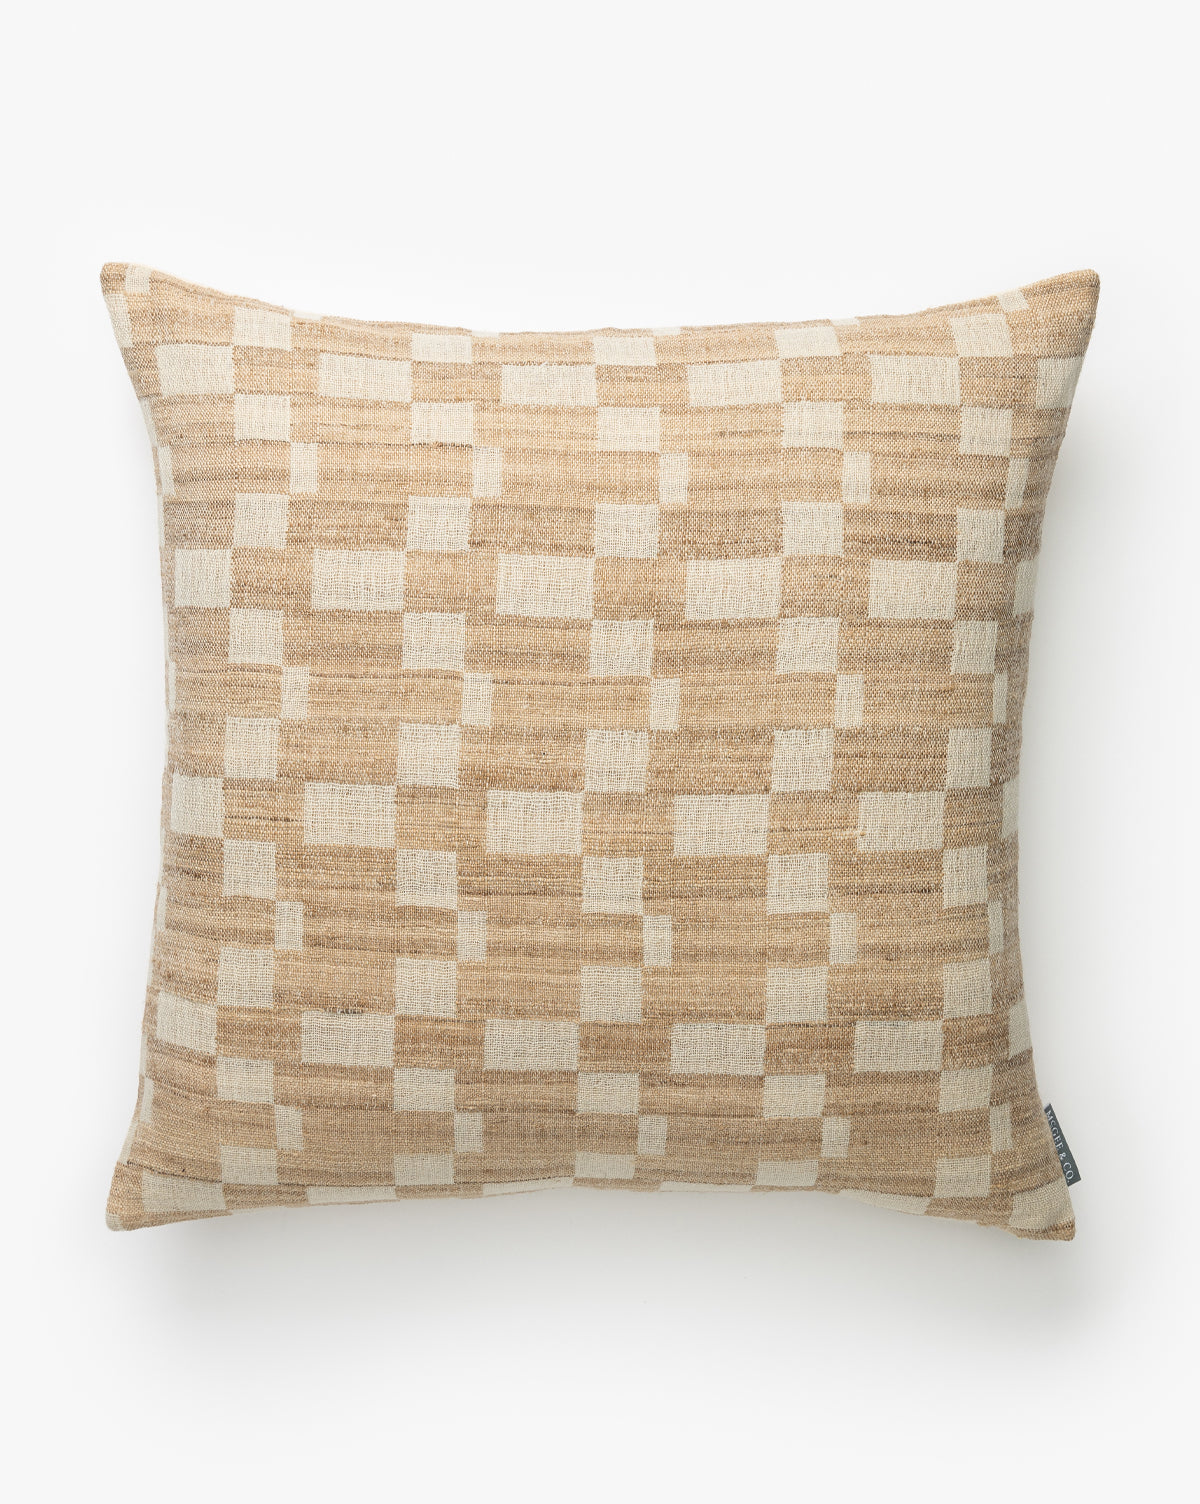 Tal, Hedgerow Pillow Cover